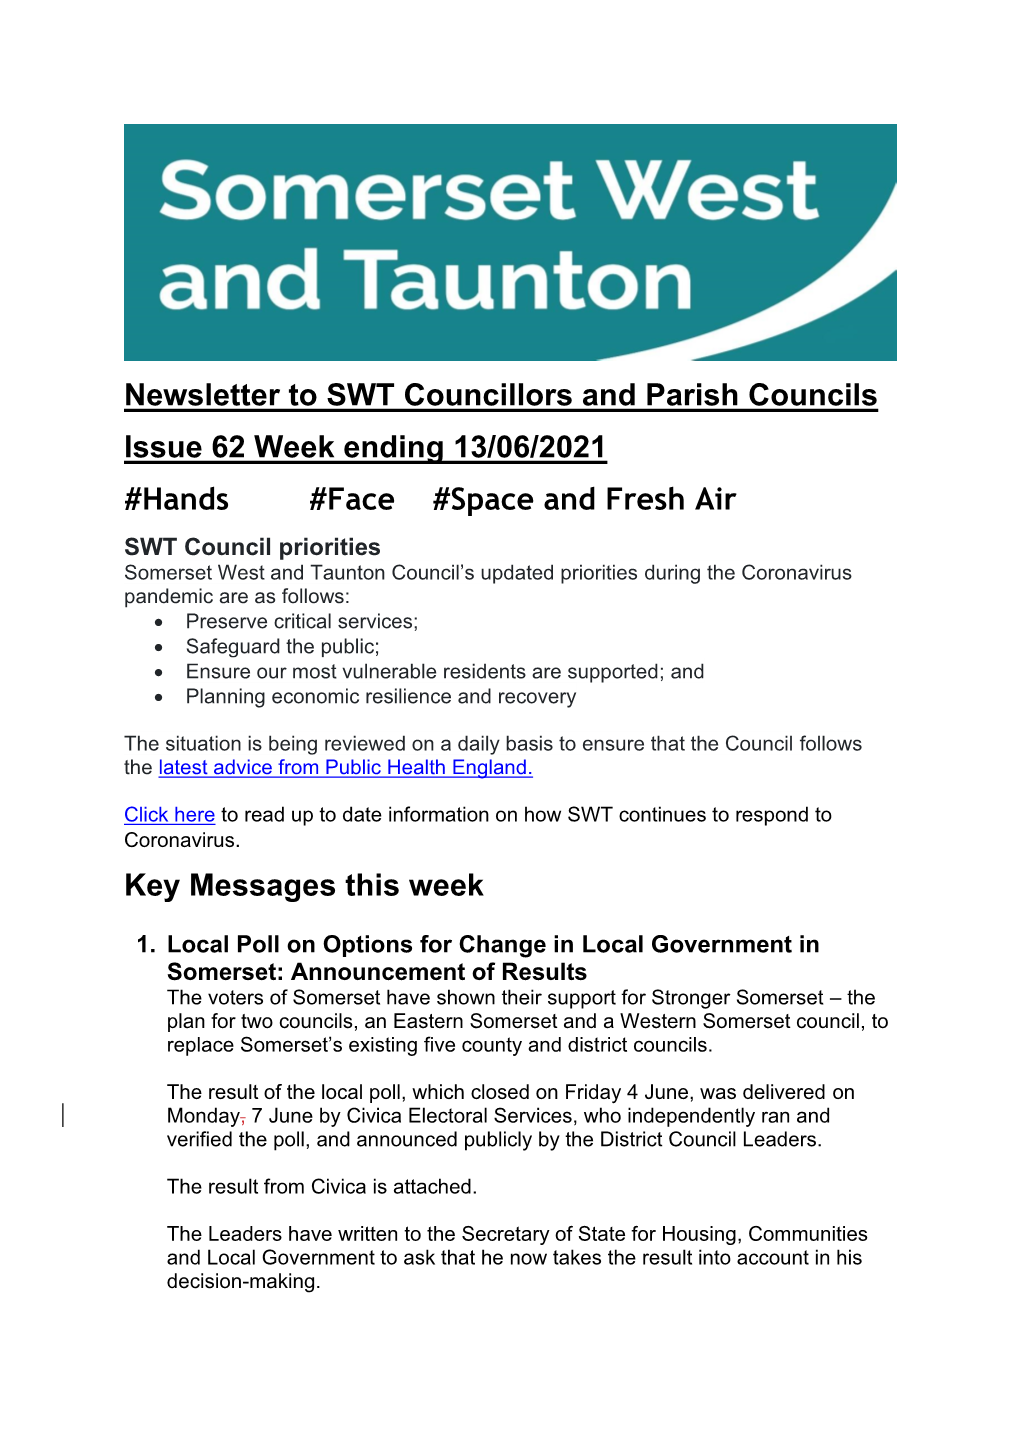 SWT Newsletter Edition 62